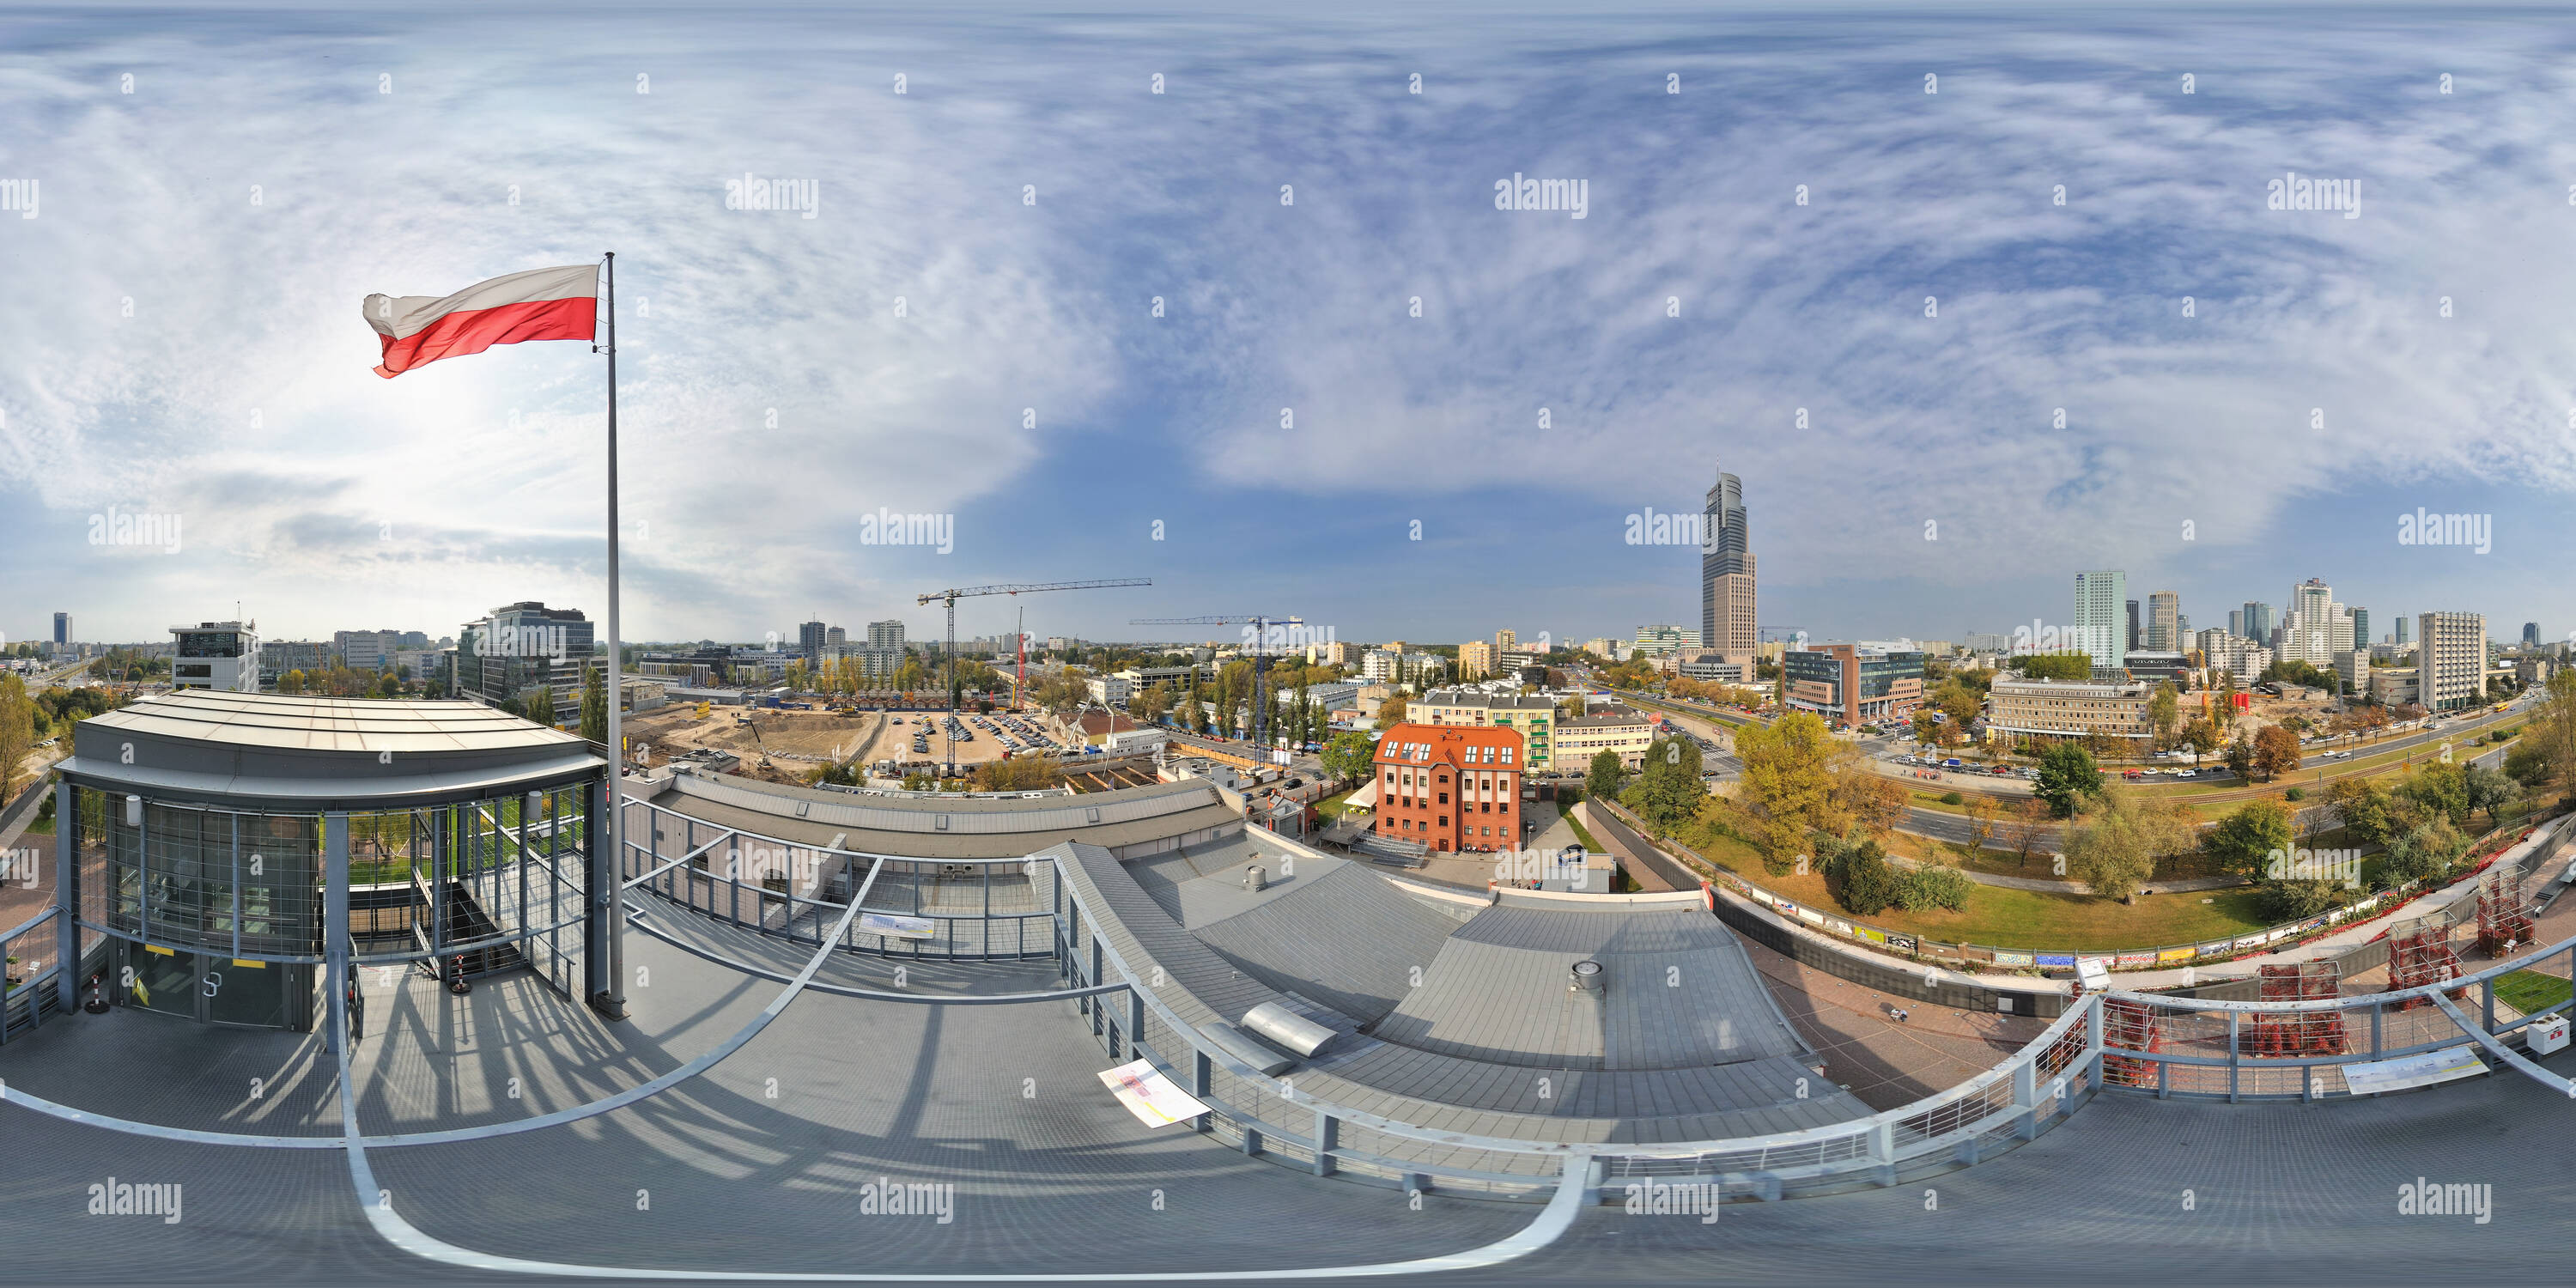 360 degree panoramic view of Warsaw Rising Museum - observation deck on the 4th floor